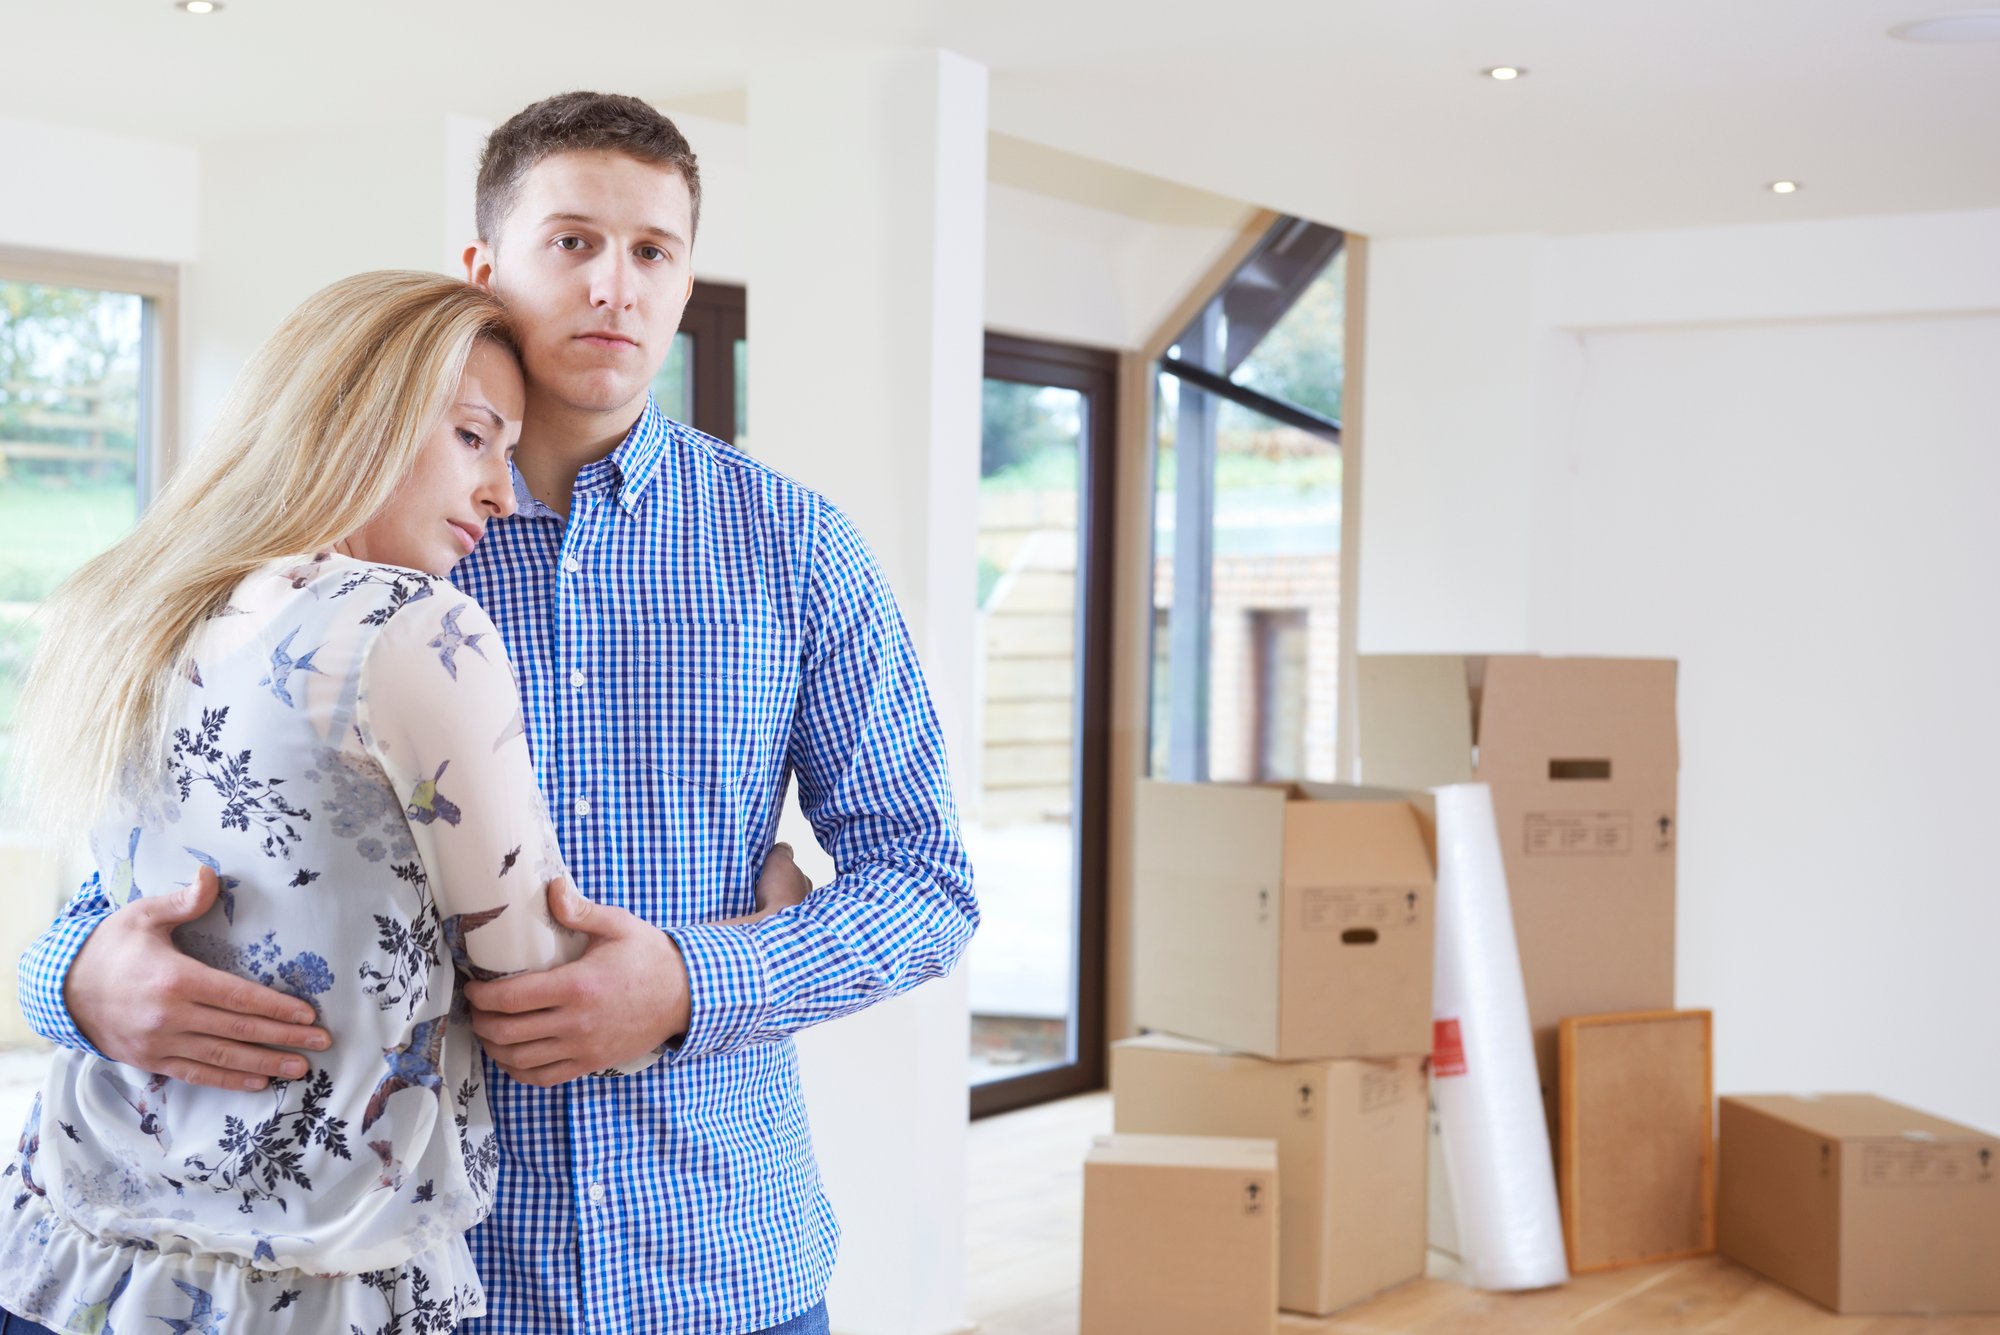 Young Couple Forced To Move Home Through Financial Problems